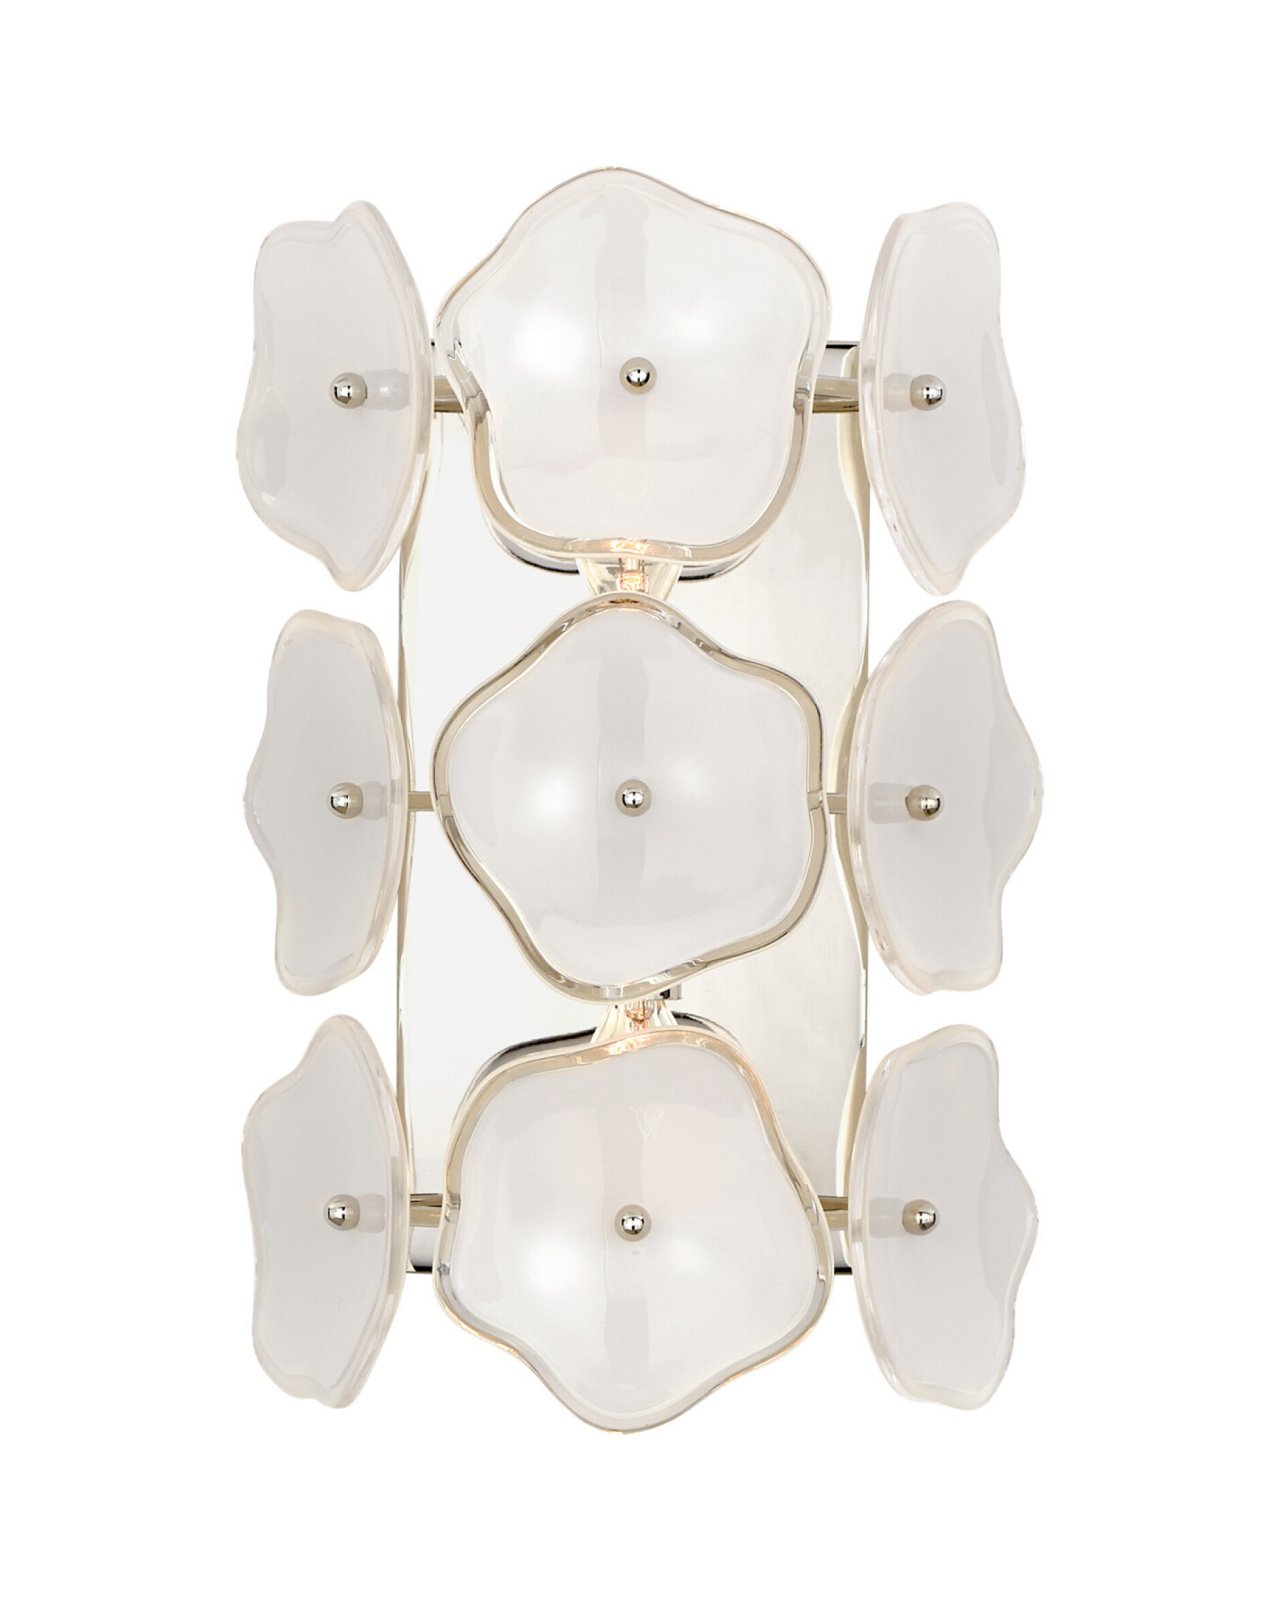 Leighton Small Sconce Polished Nickel/Cream Tinted Glass